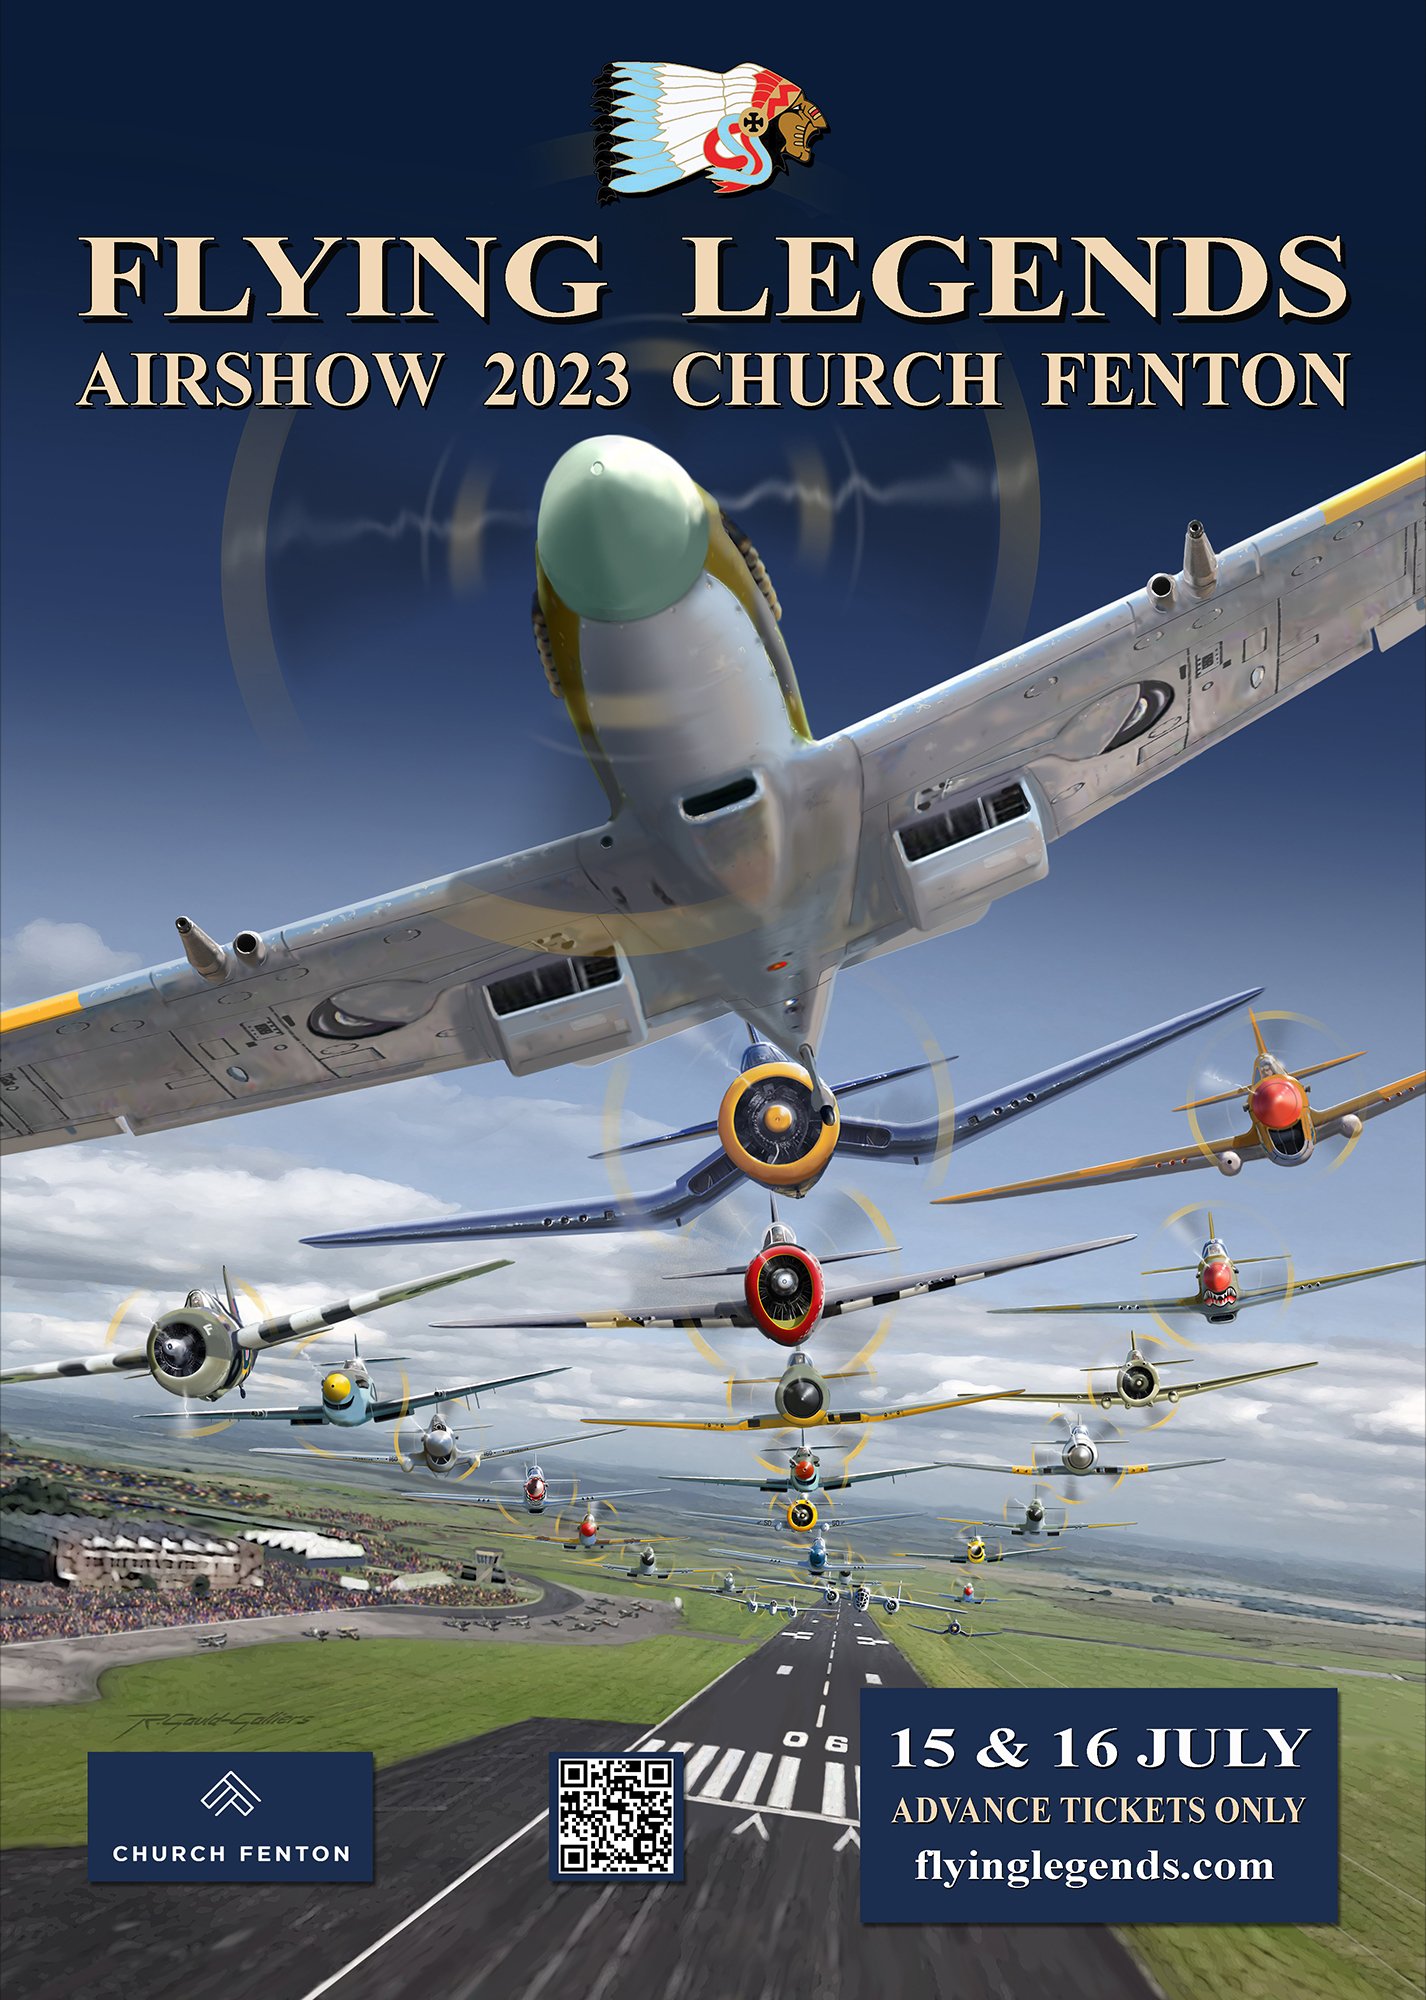 Image name Legends 2023 Poster hero 02 the 1 image from the post The Flying Legends Airshow in Yorkshire.com.